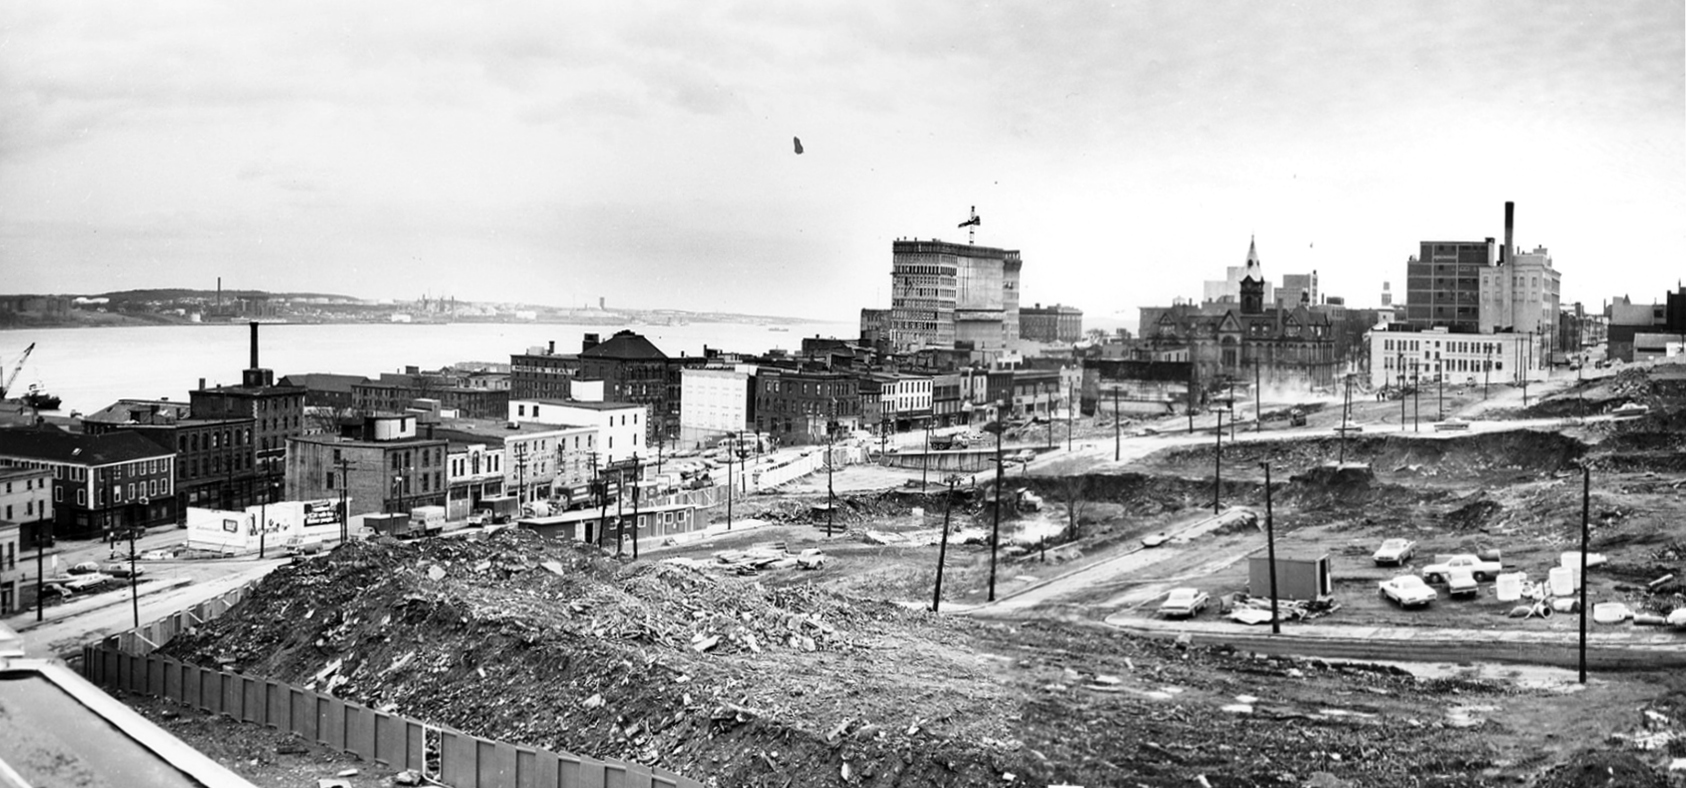 view of the Scotia Square excavation site as seen from the Trade Mart building. The view includes the Moir's Factory, City Hall, the Royal Bank of Canada (under construction), and some buildings along Barrington St.